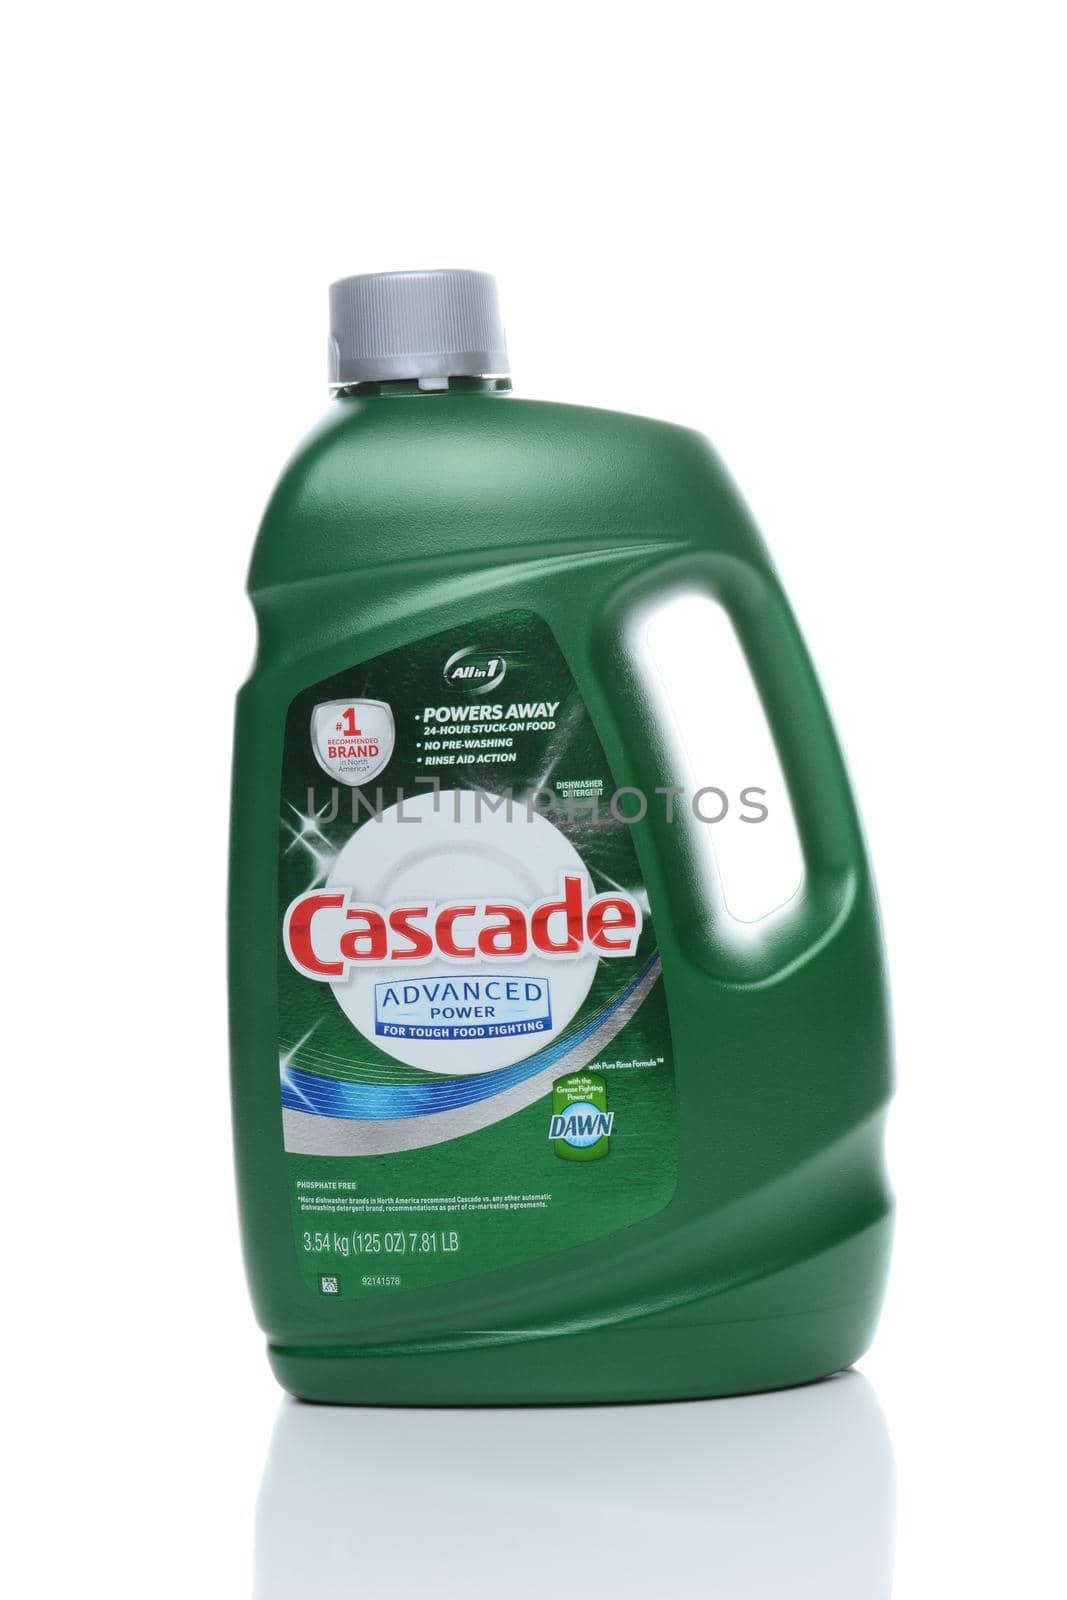 IRVINE, CA - FEBRUARY 19, 2015: A bottle of Cascade Dishwasher Detergent. Made by Proctor & Gamble, Cascade is the number one brand in North America.